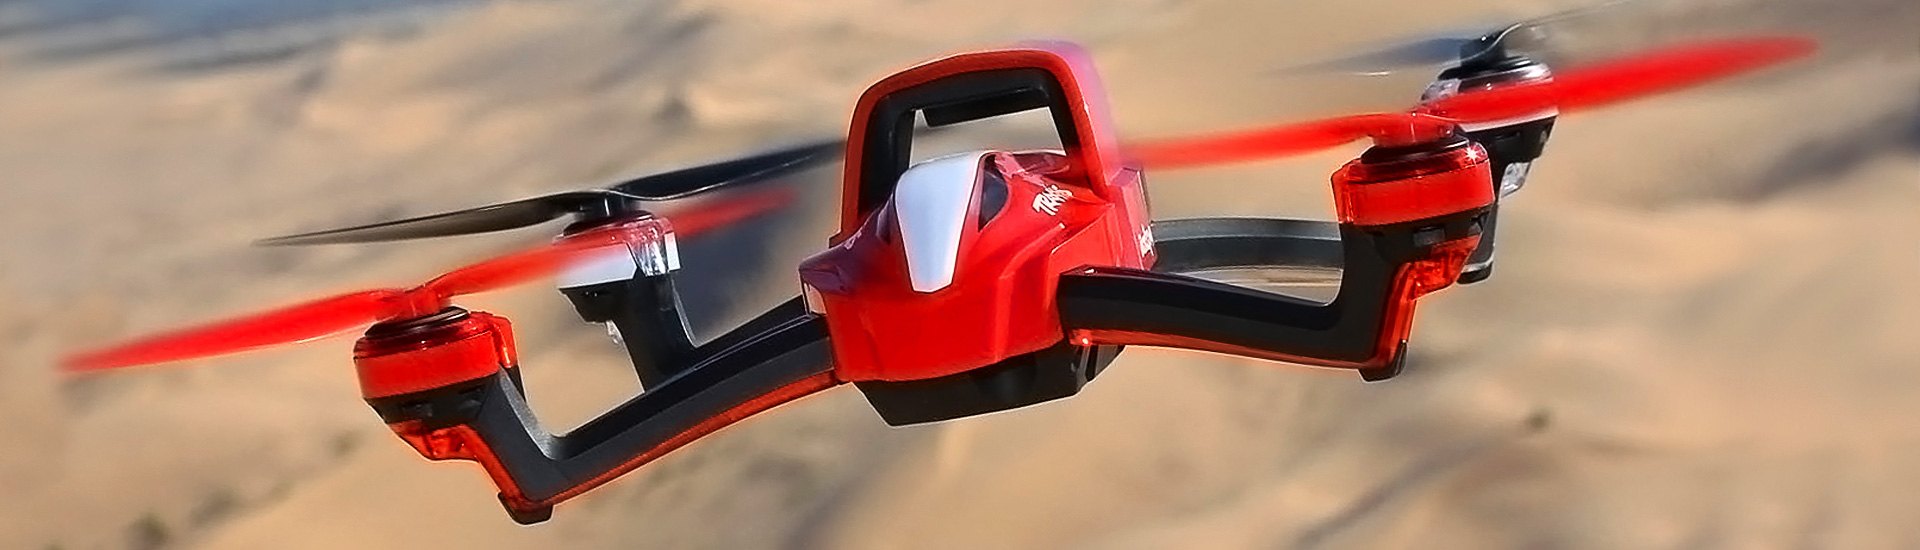 Drones You Can Own | Affordable Flying Fun